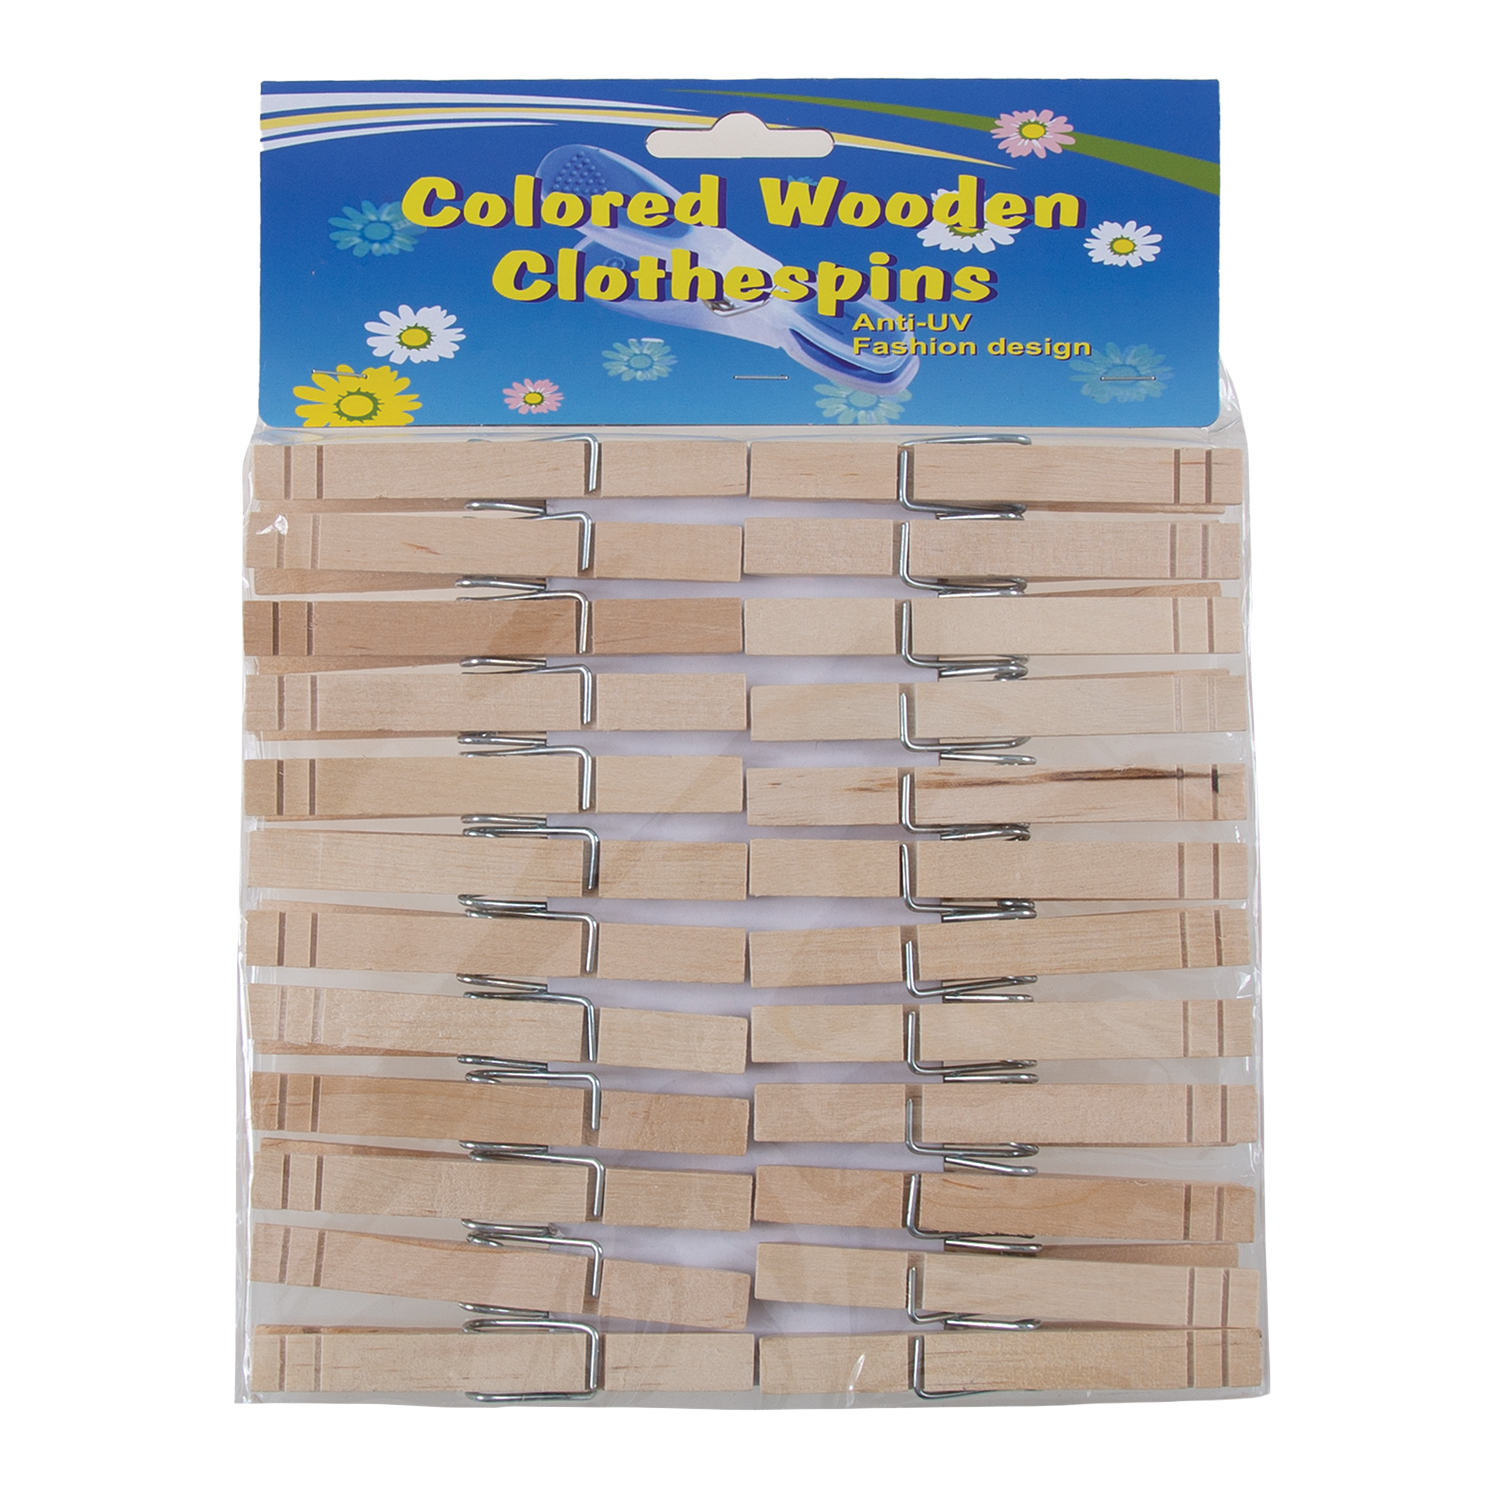 Wood clothespins with spring, pk. of 24